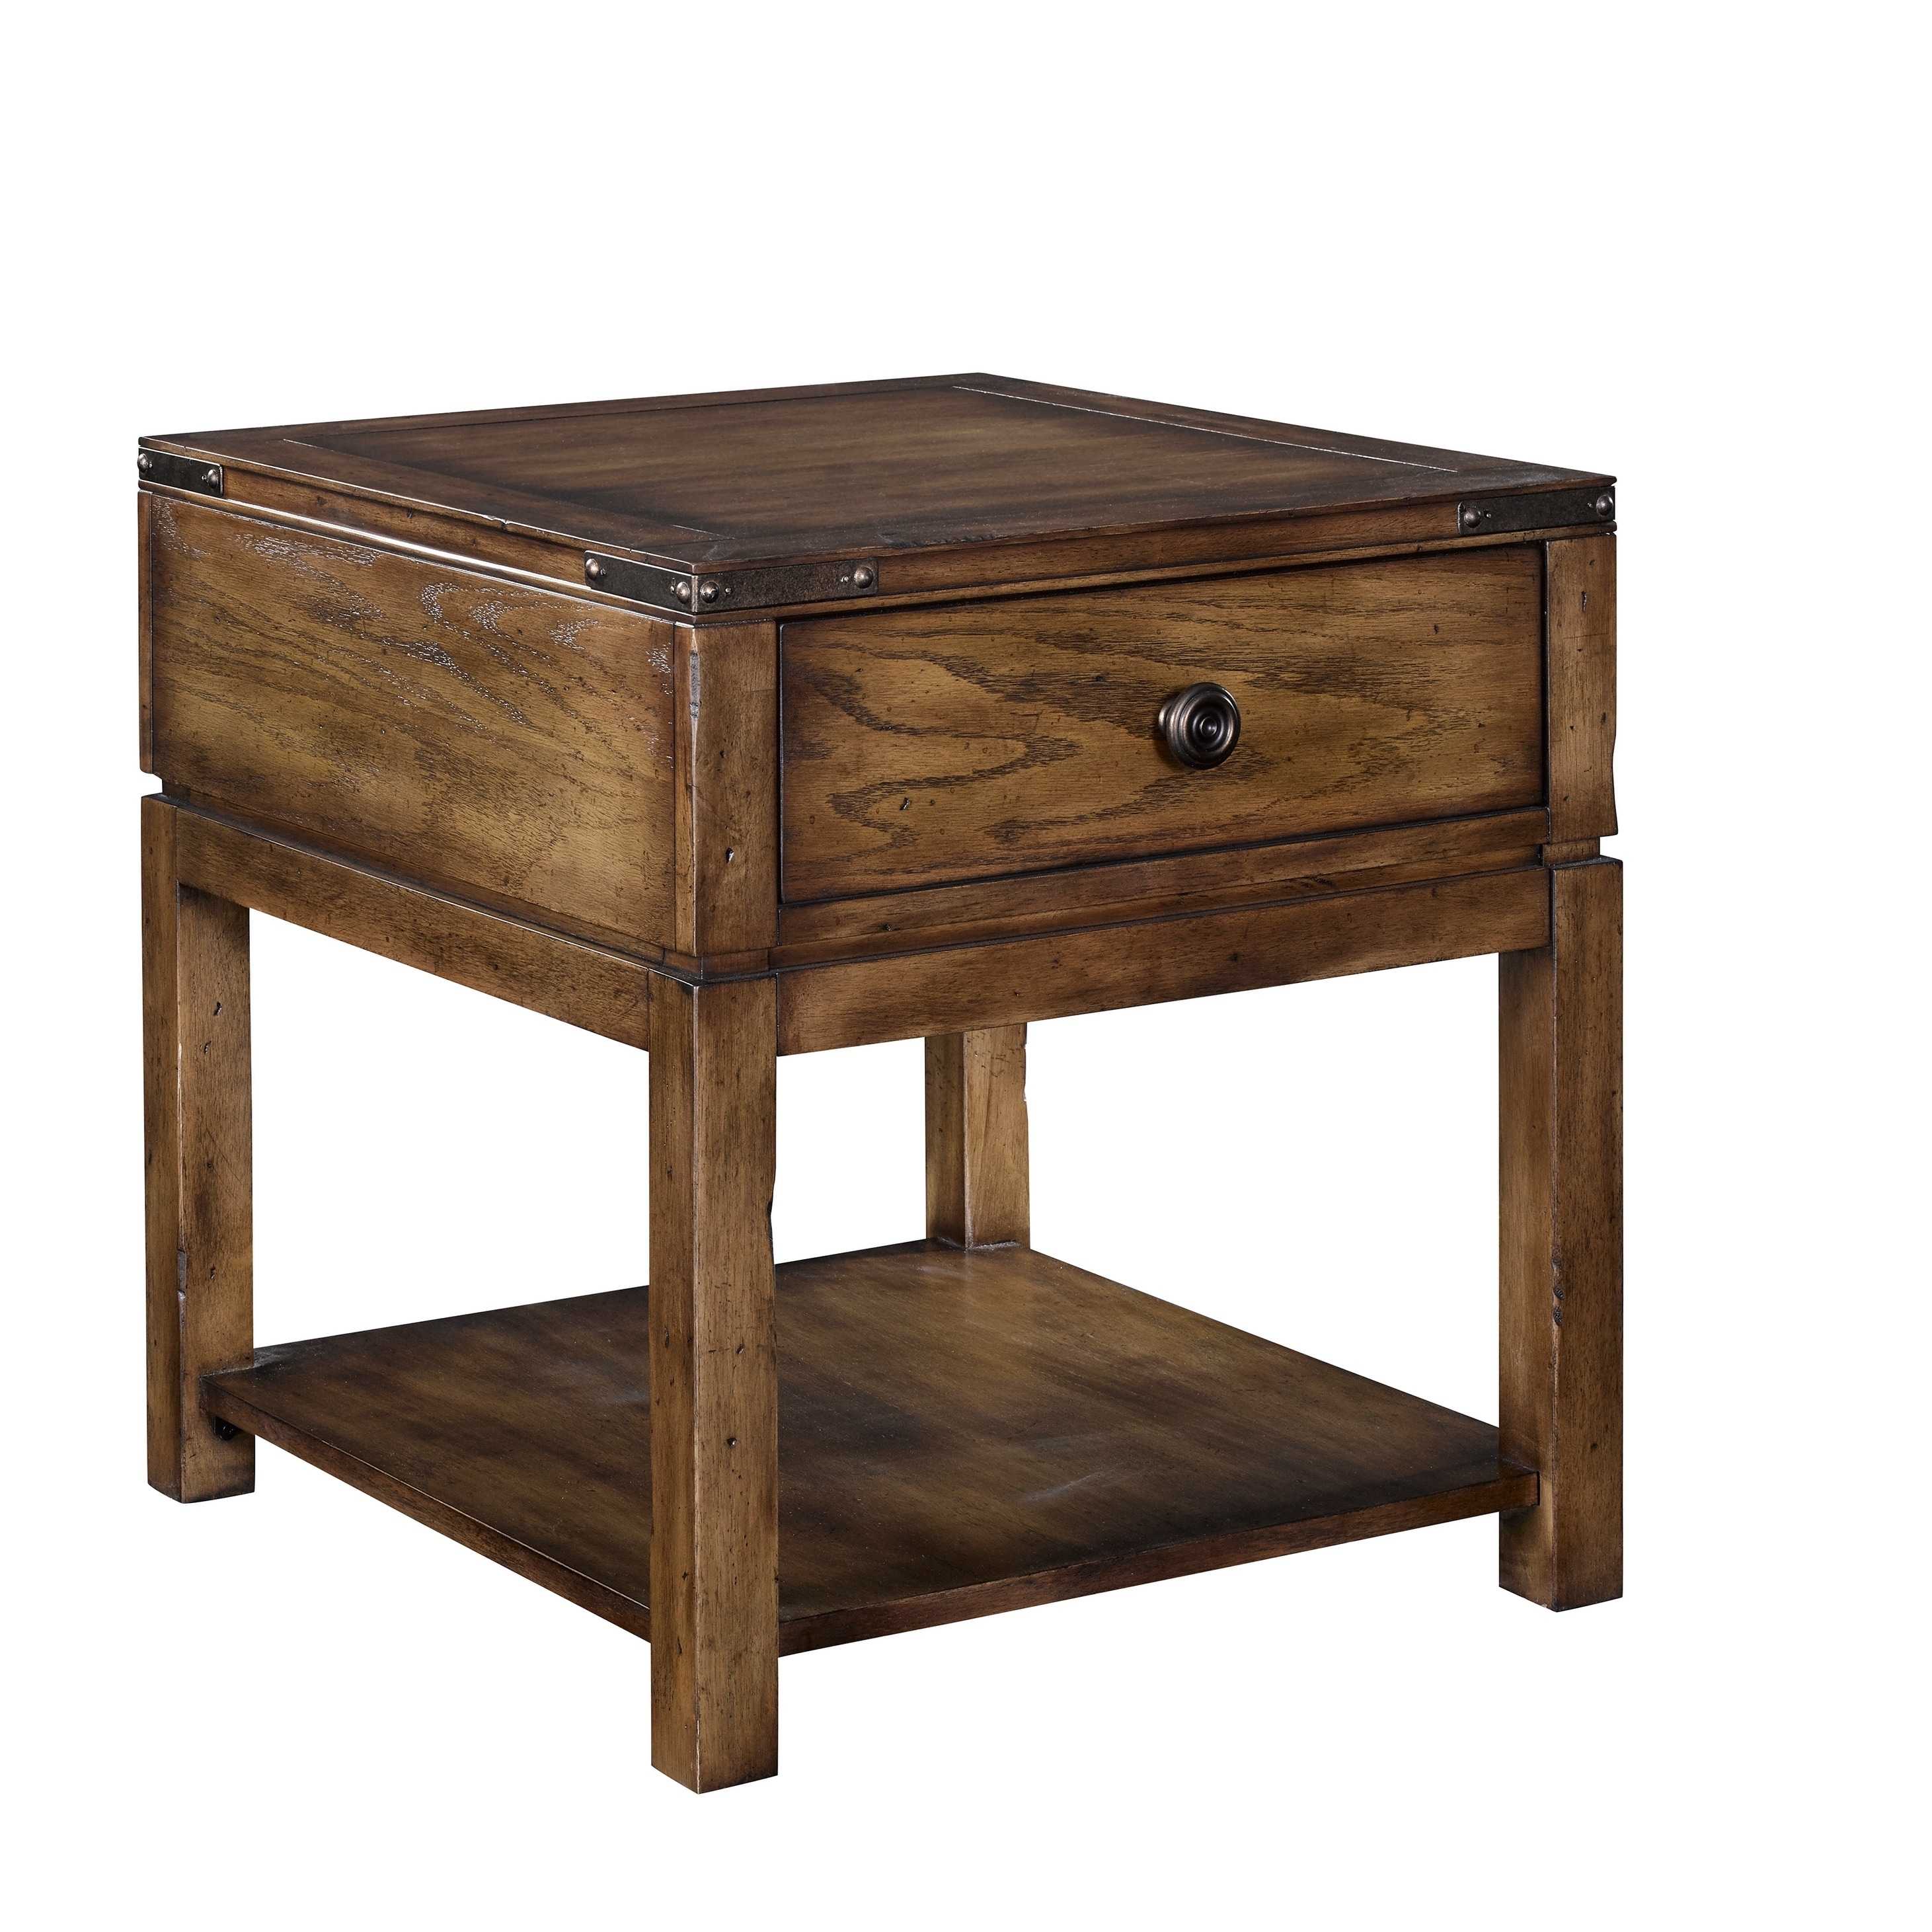 Shop Broyhill Pike Place Drawer End Table Overstock 21621538